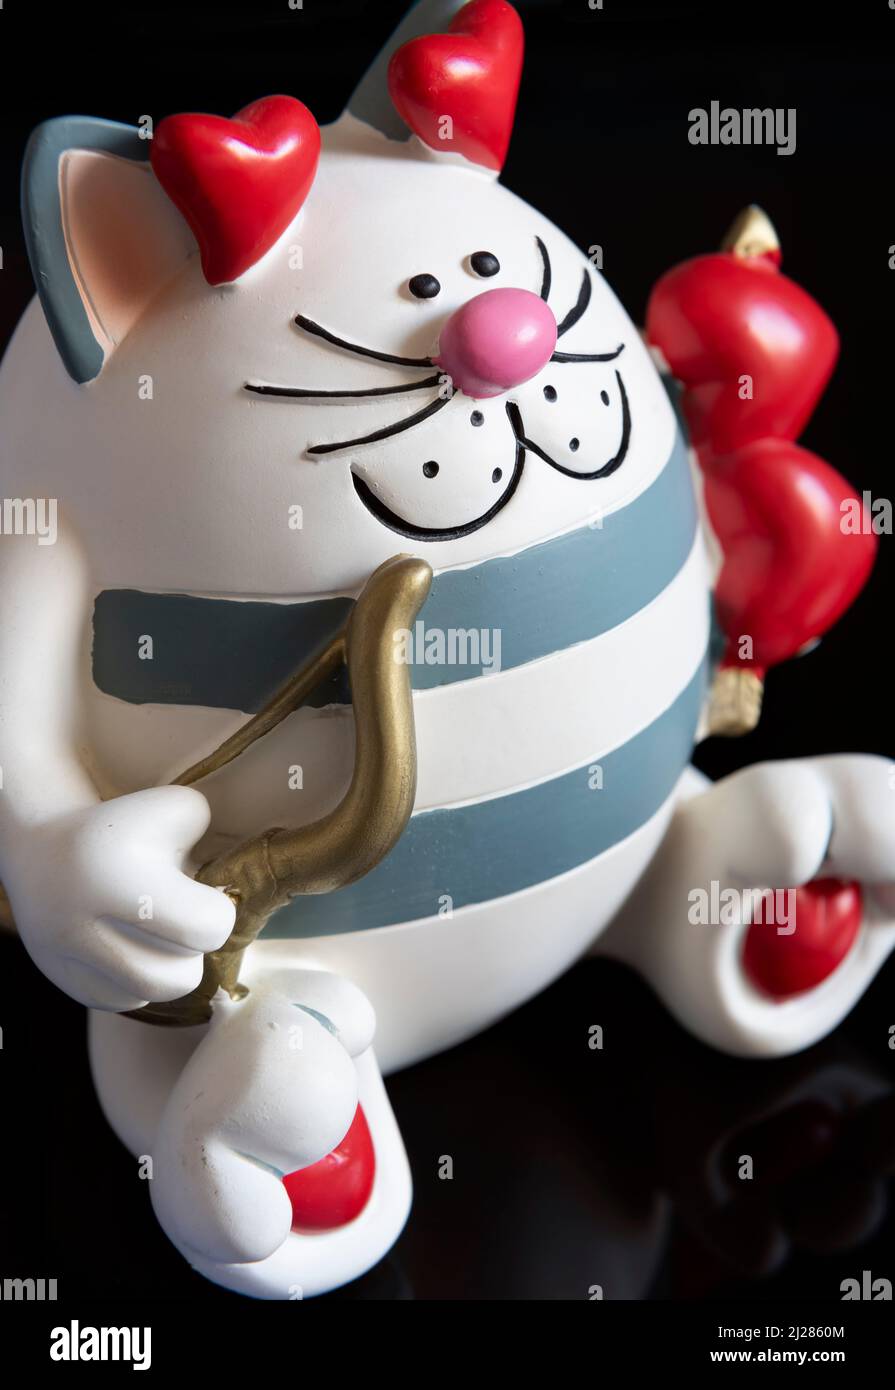 A novelty money box in the form of a caricature cupid cat. Stock Photo